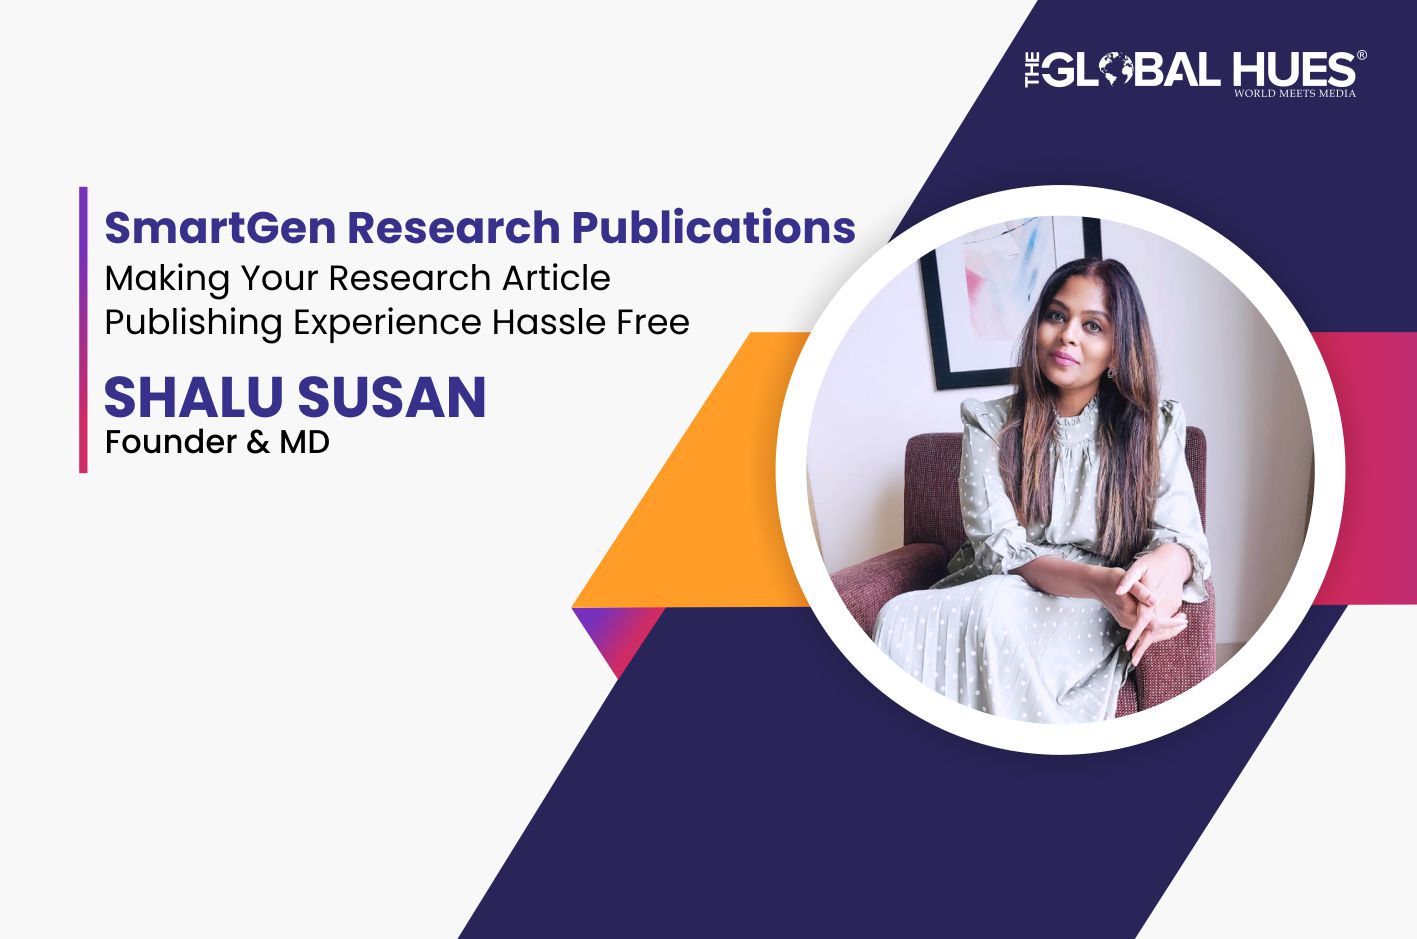 SmartGen Research Publications: Making your Research Article Publishing Experience Hassle Free